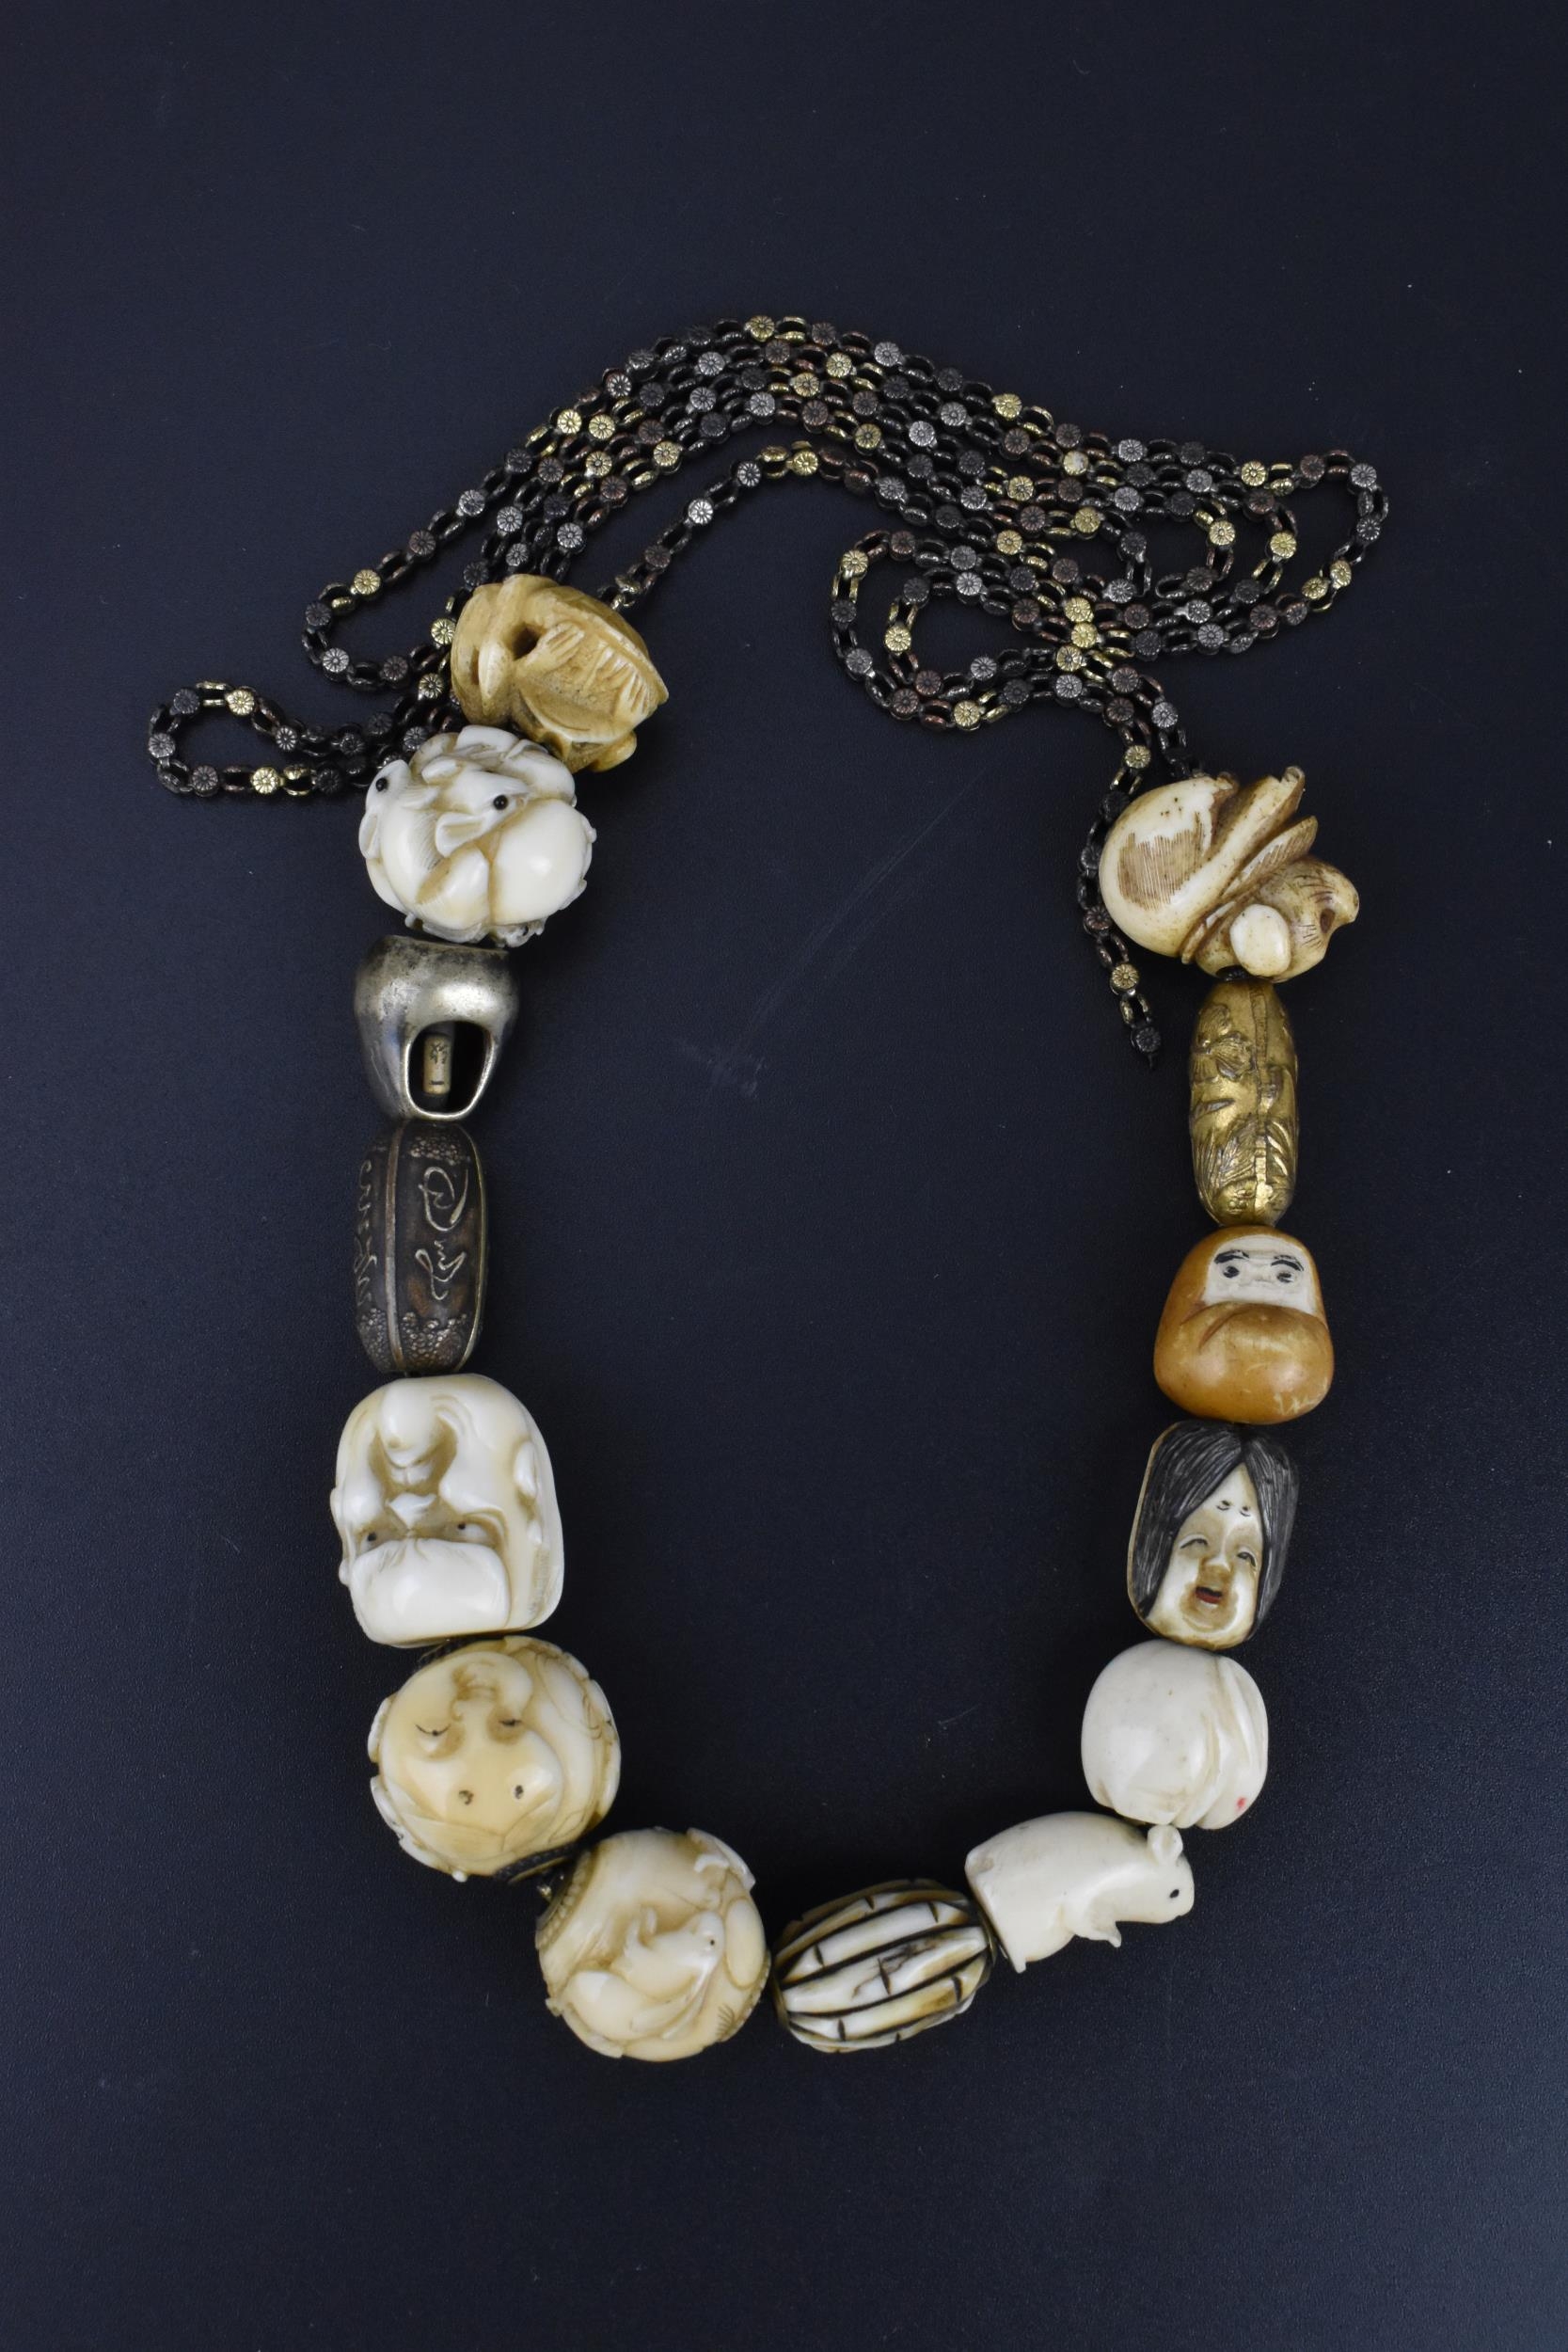 A 19th century Japanese ojime bead necklace, with carved ivory, bone, and metal ojimes, modelled